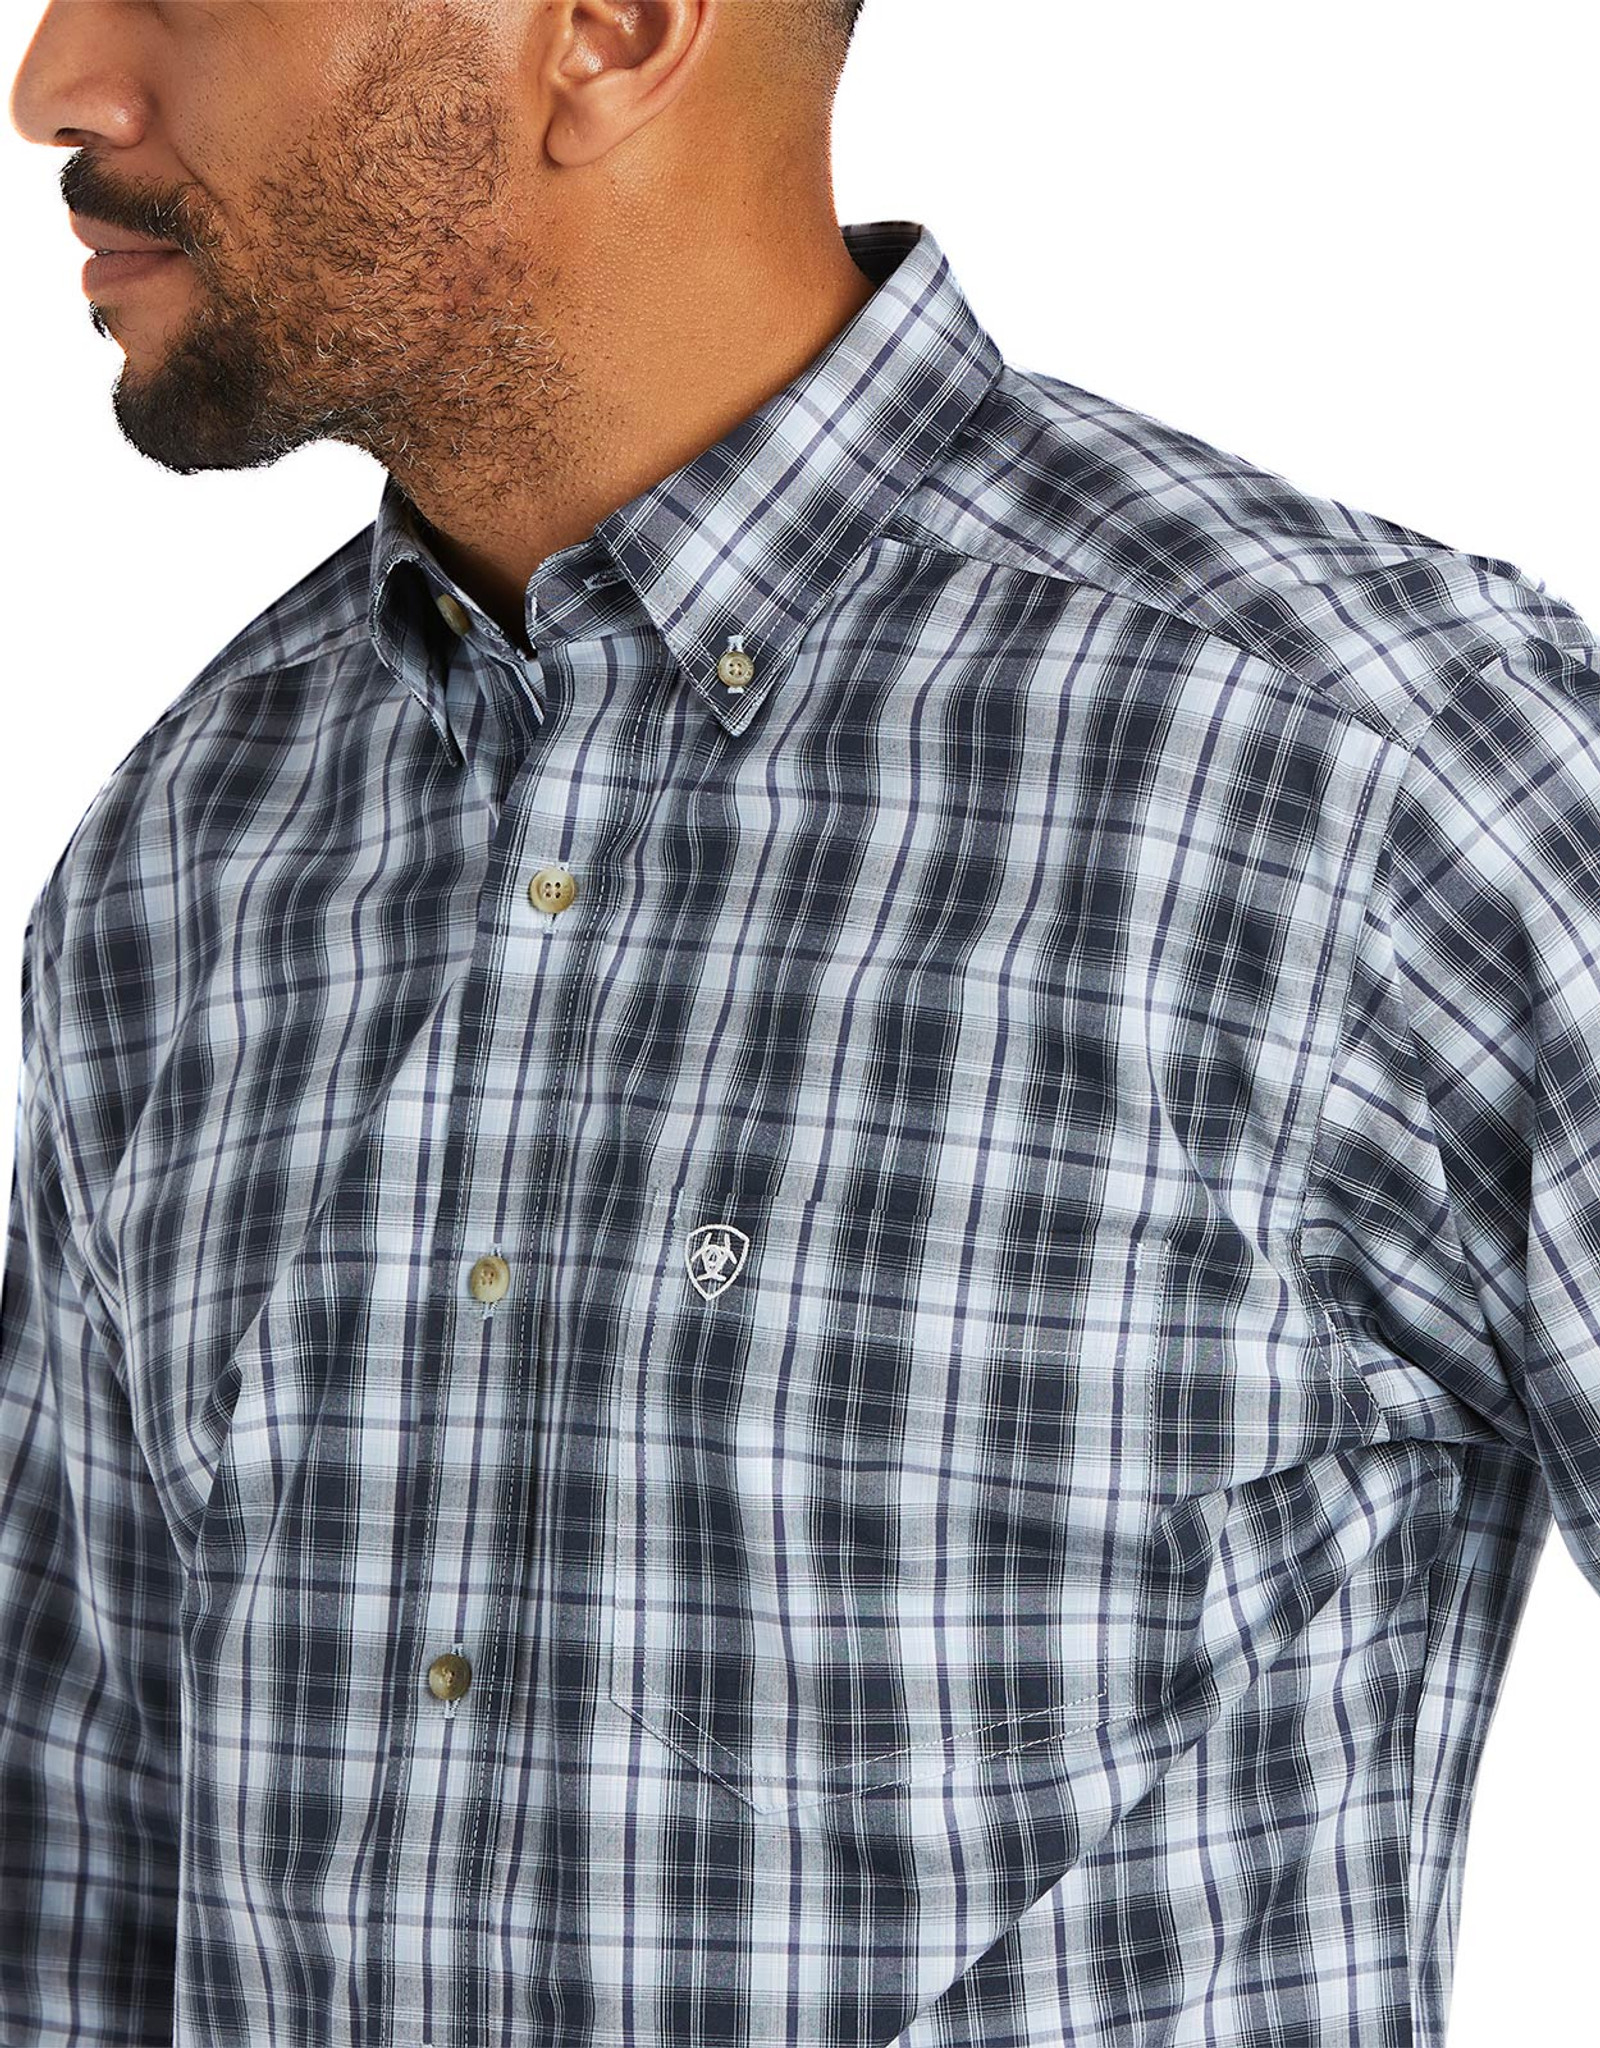 Ariat Men's Pro Series Fitted Long Sleeve Plaid Button Down Shirt - Blue